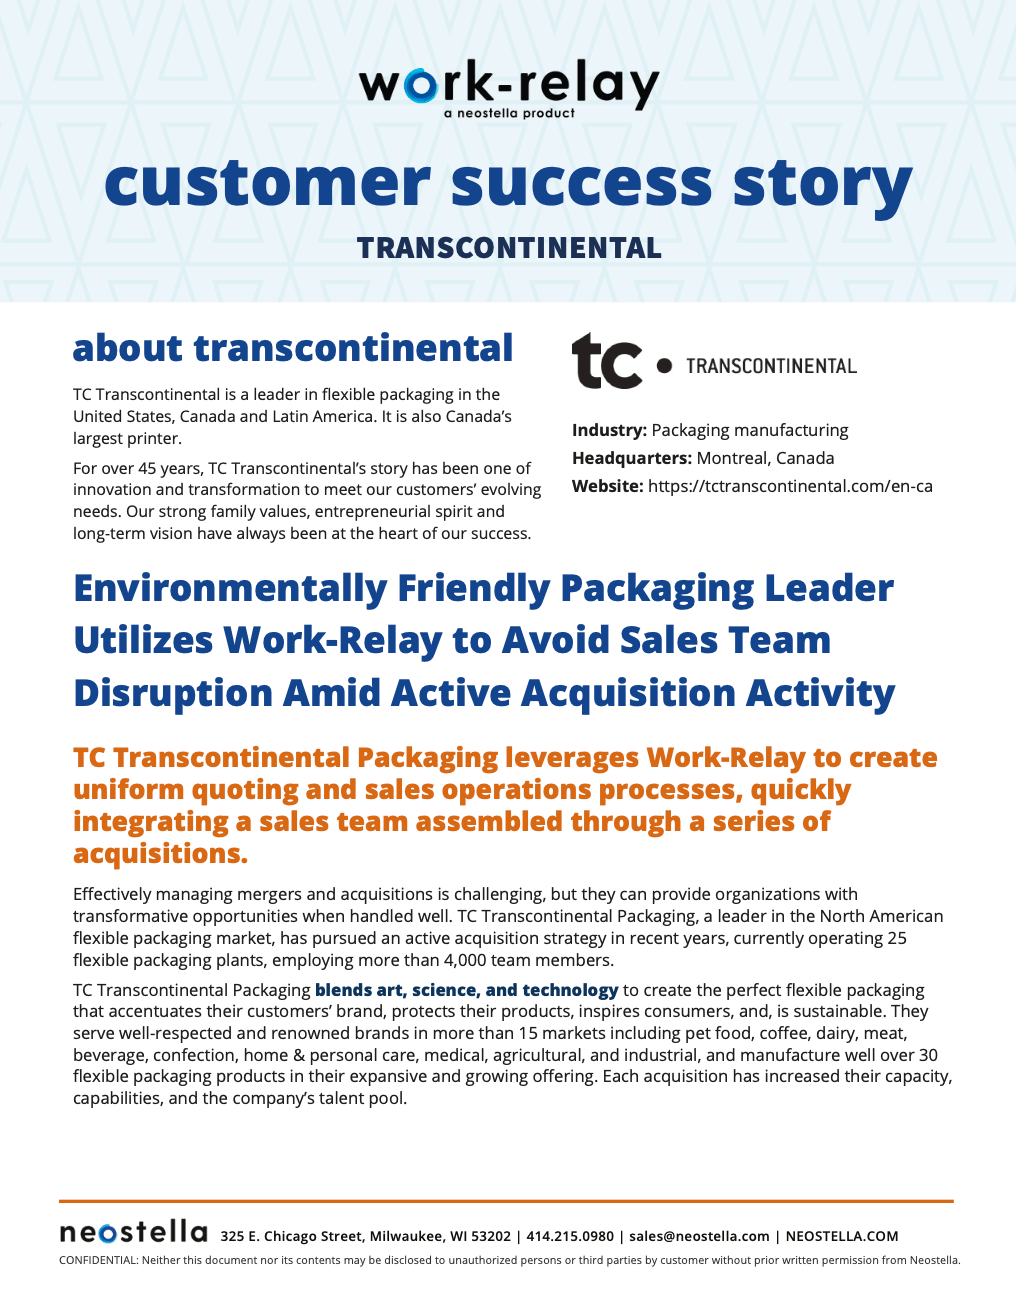 A preview of the customer success story download regarding how transcontinental packaging transformed their sales operations through a merger using Work-Relay